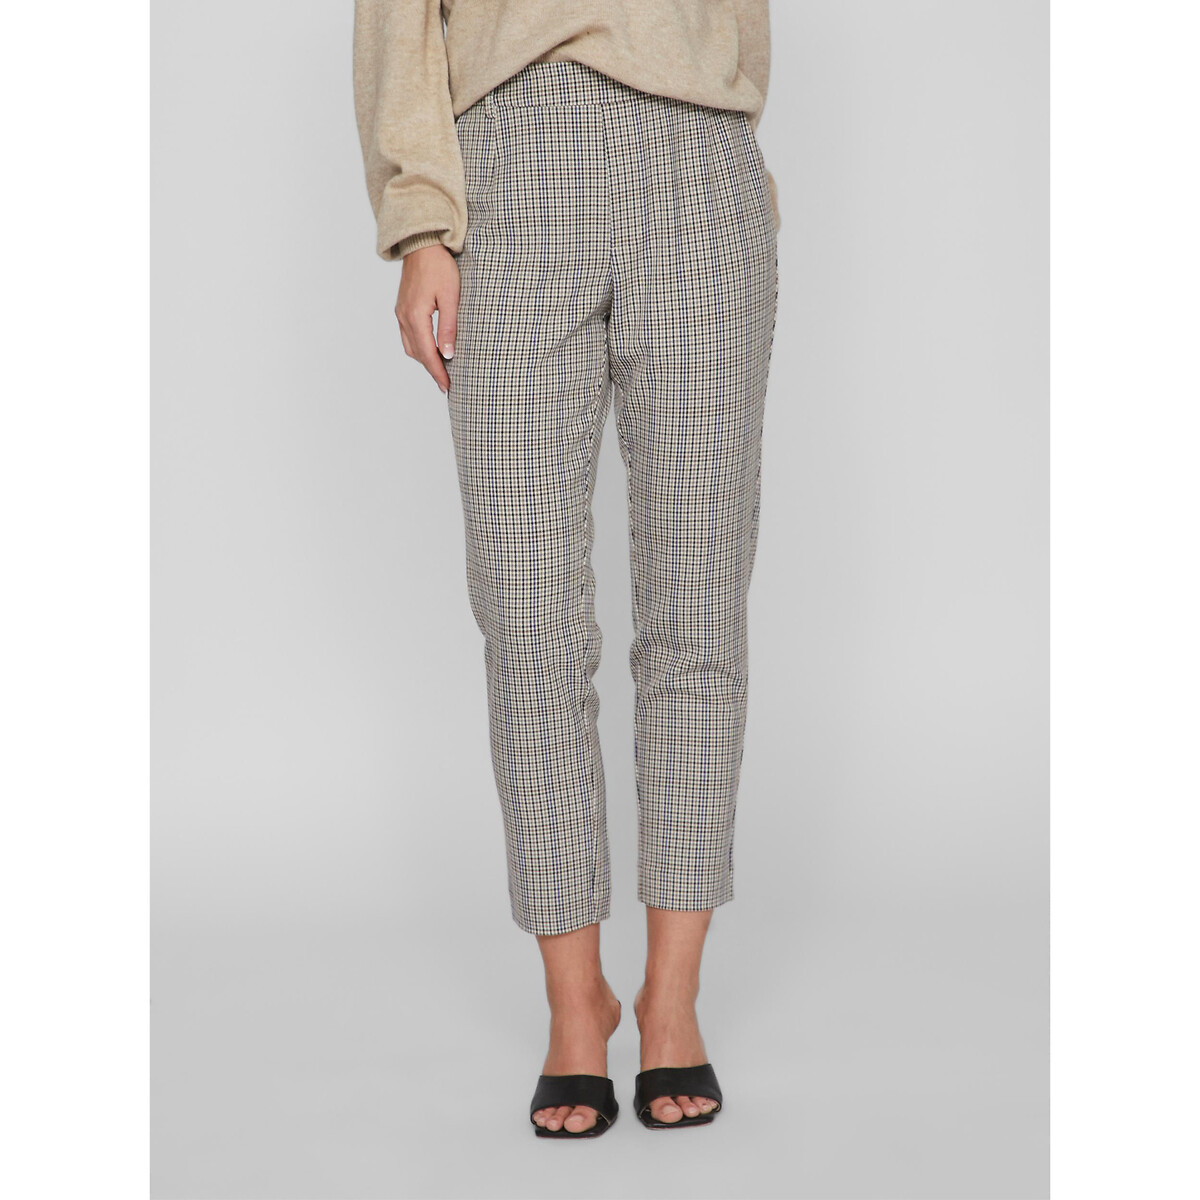 Checked Slim Fit Trousers with High Waist